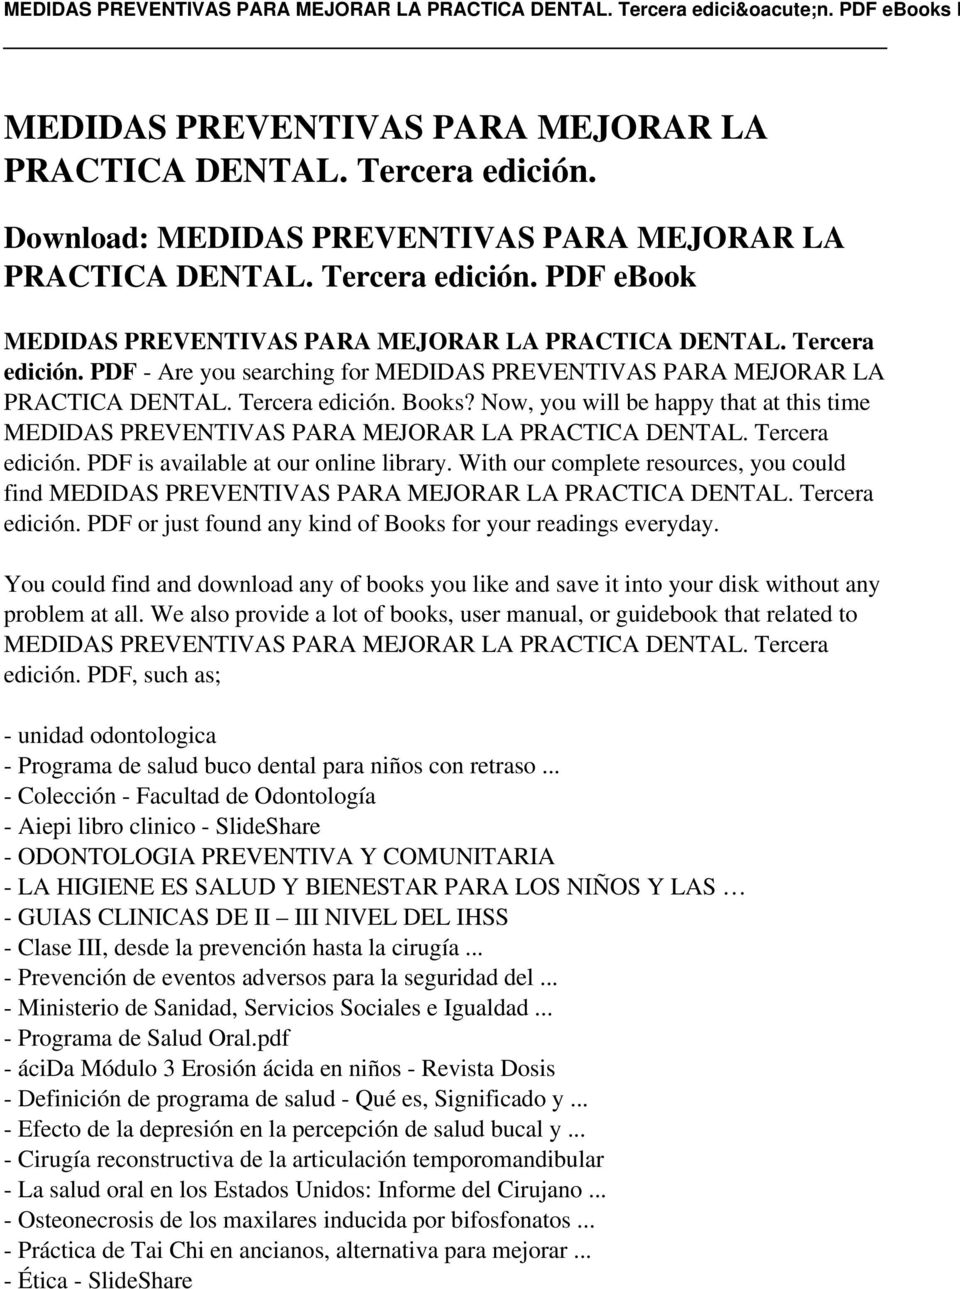 Now, you will be happy that at this time MEDIDAS PREVENTIVAS PARA MEJORAR LA PRACTICA DENTAL. Tercera edición. PDF is available at our online library.